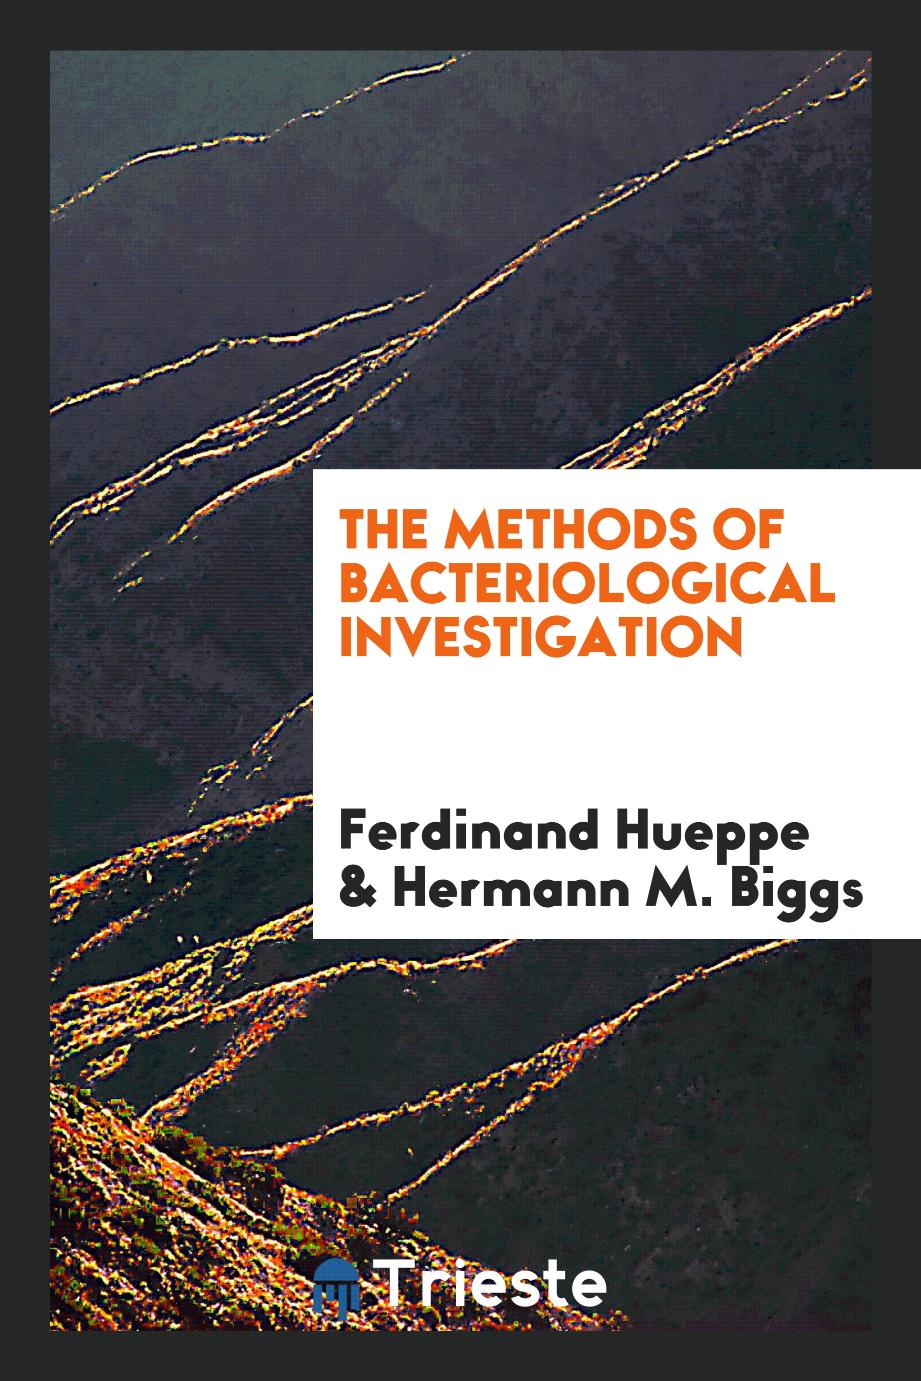 The Methods of Bacteriological Investigation